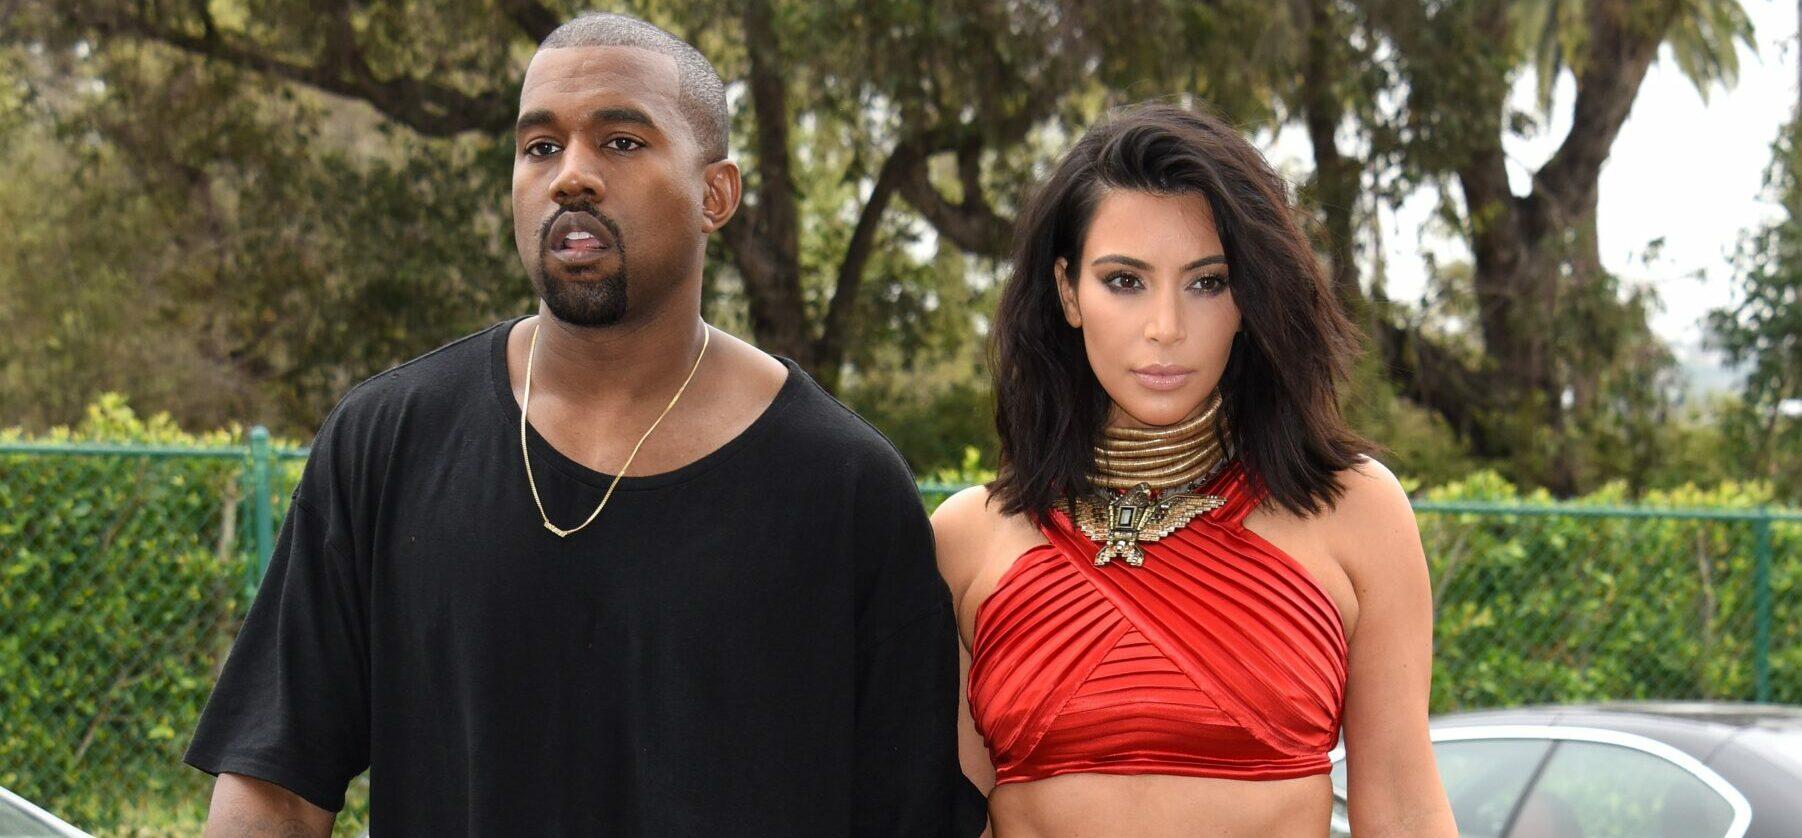 Kim Kardashian Reveals She Protected Kanye West And ‘STILL WILL’ For Her Kids